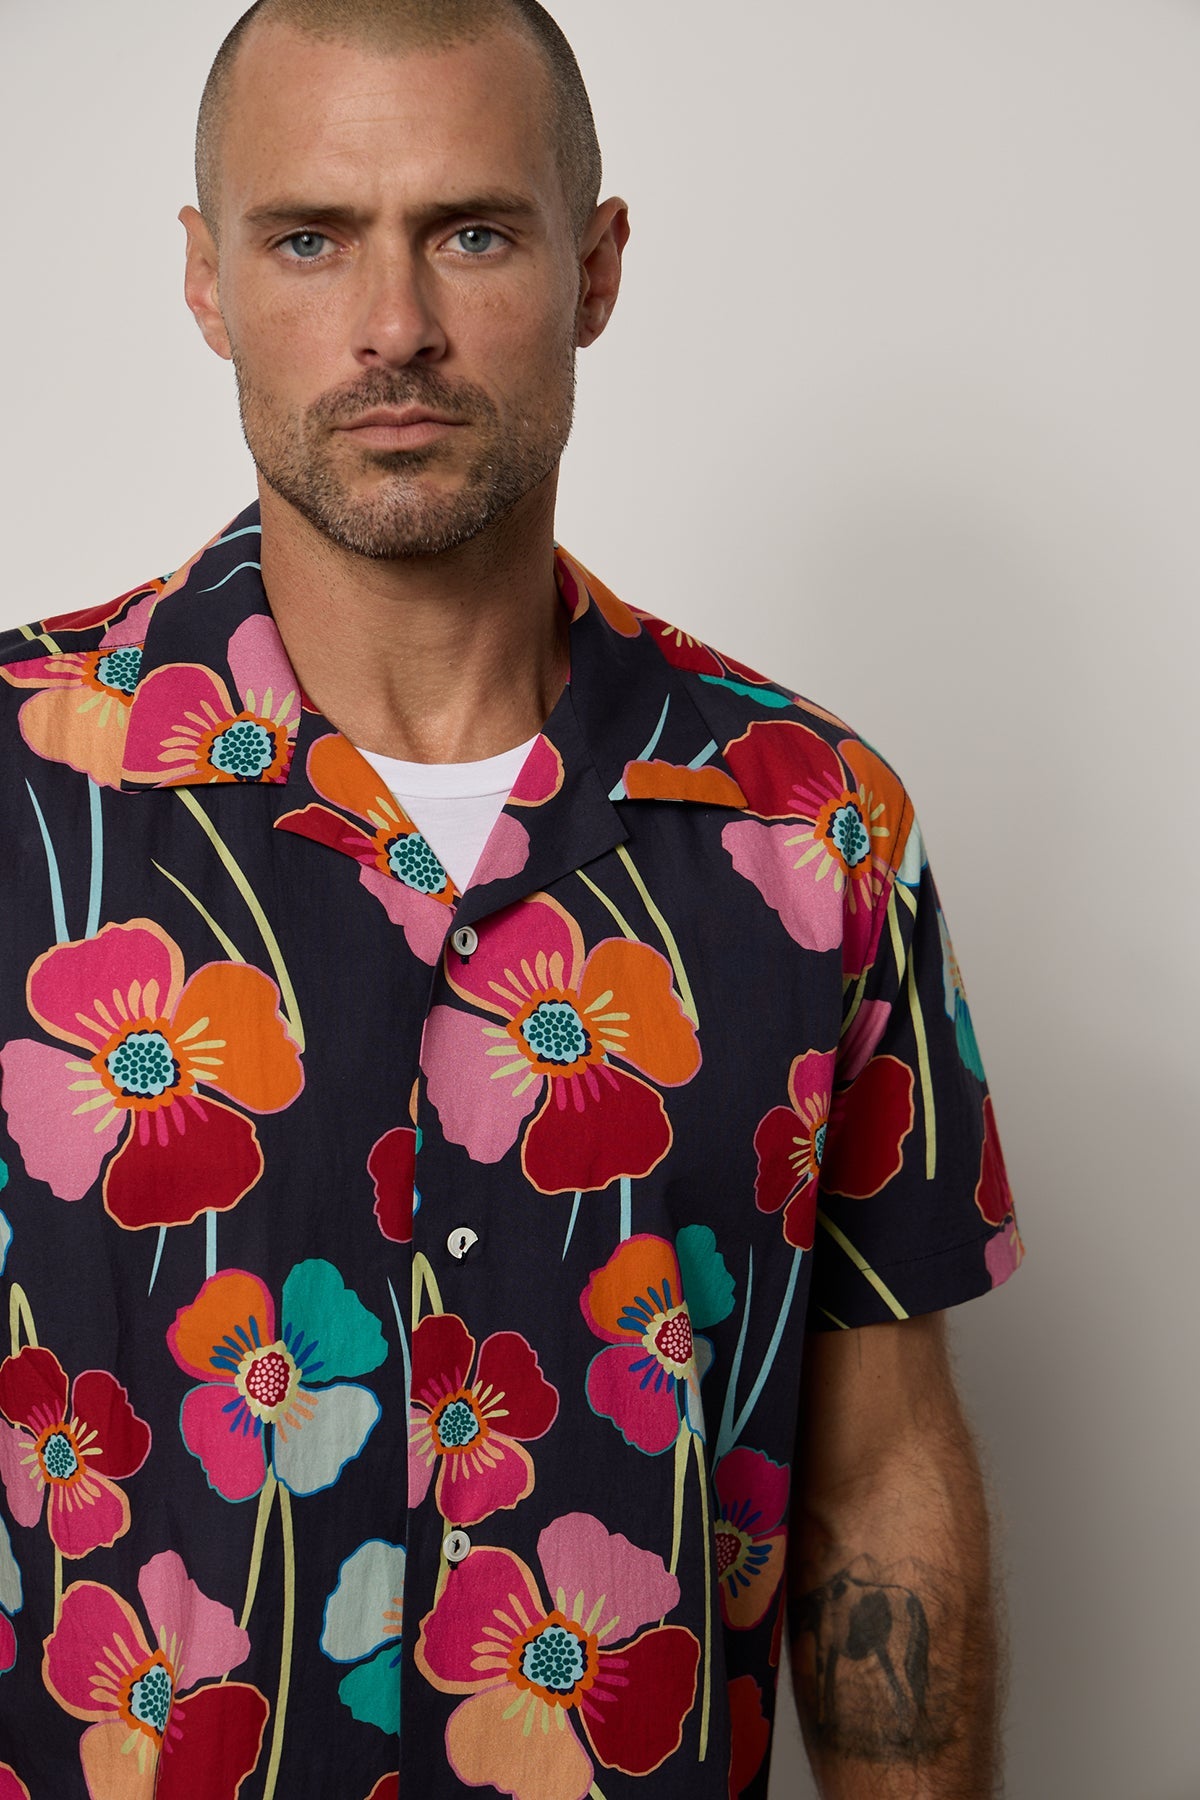 Iggy Button up shirt in Bahama print with large bold modern flower print on dark background close up front-26801038950593